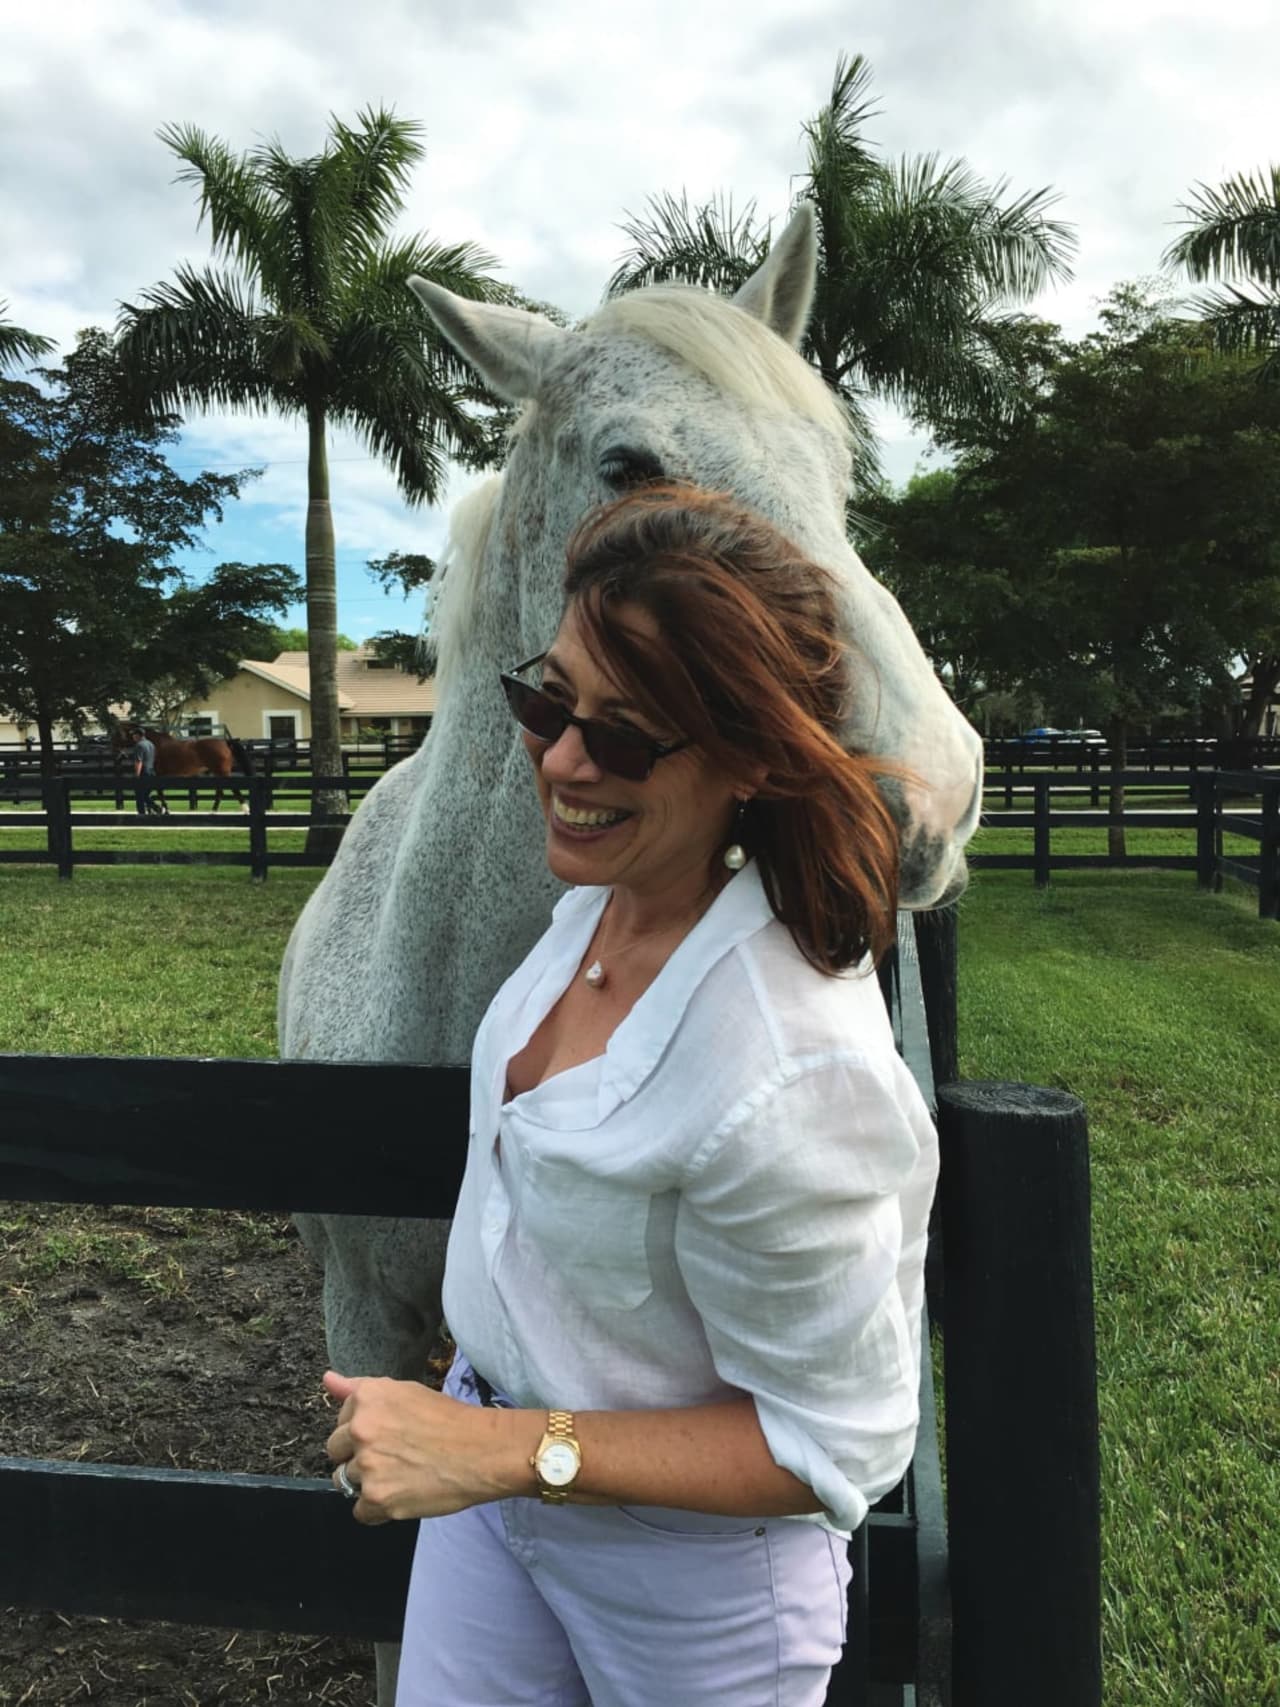 Between riding horses and a long real estate career, Sally Slater is an expert at buying and selling equestrian properties.